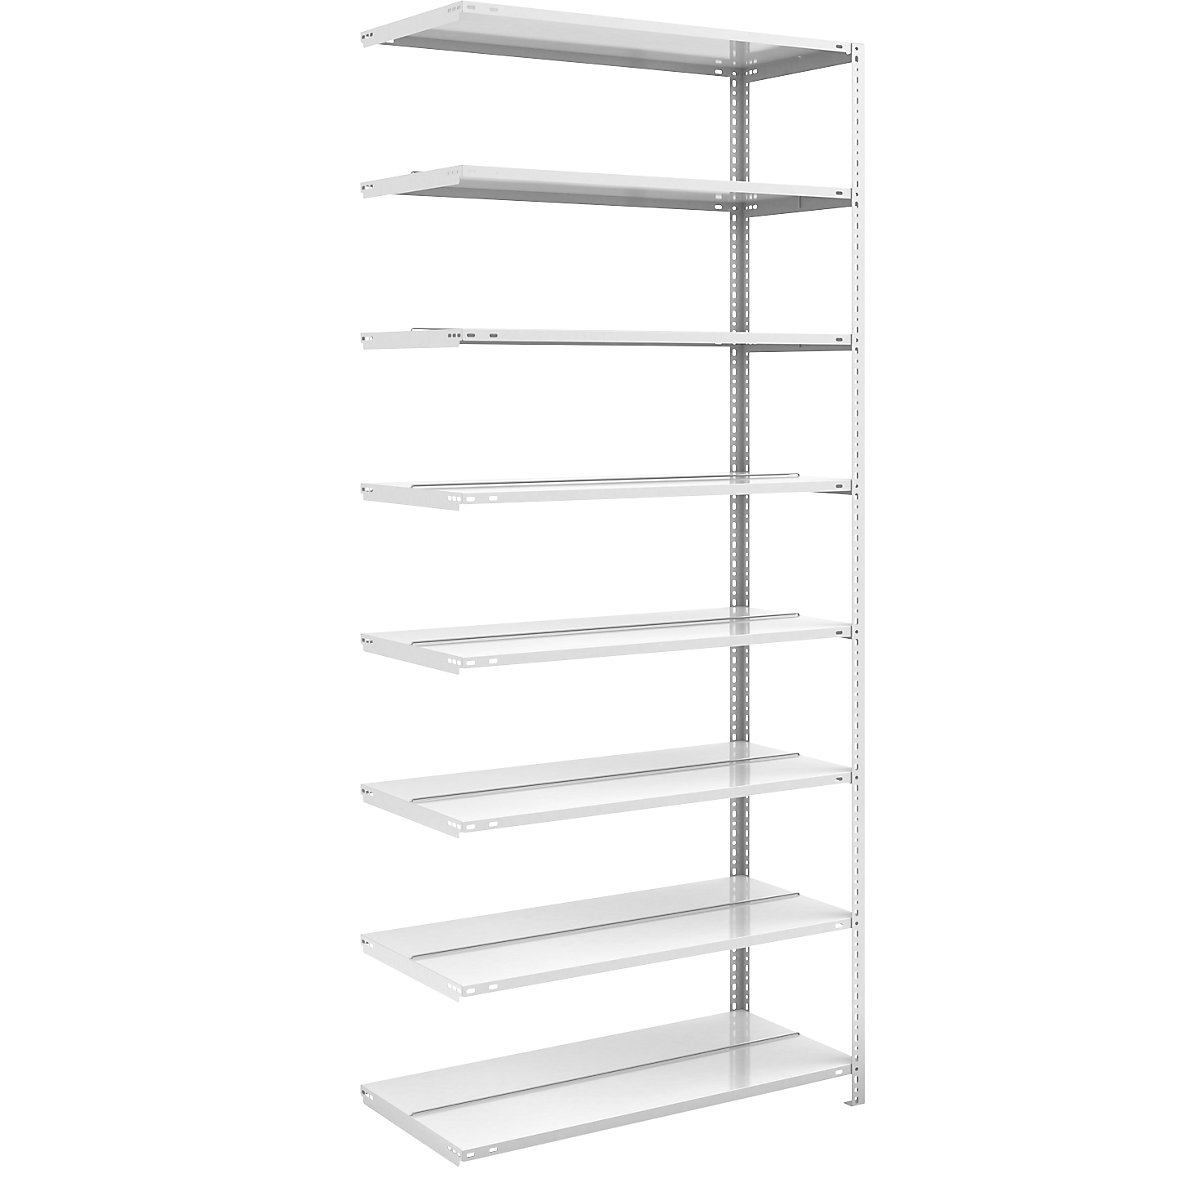 Bolt-together archive shelving, light grey RAL 7035 – hofe, shelf height 2550 mm, double sided, extension shelf, width x depth 1000 x 600 mm-6